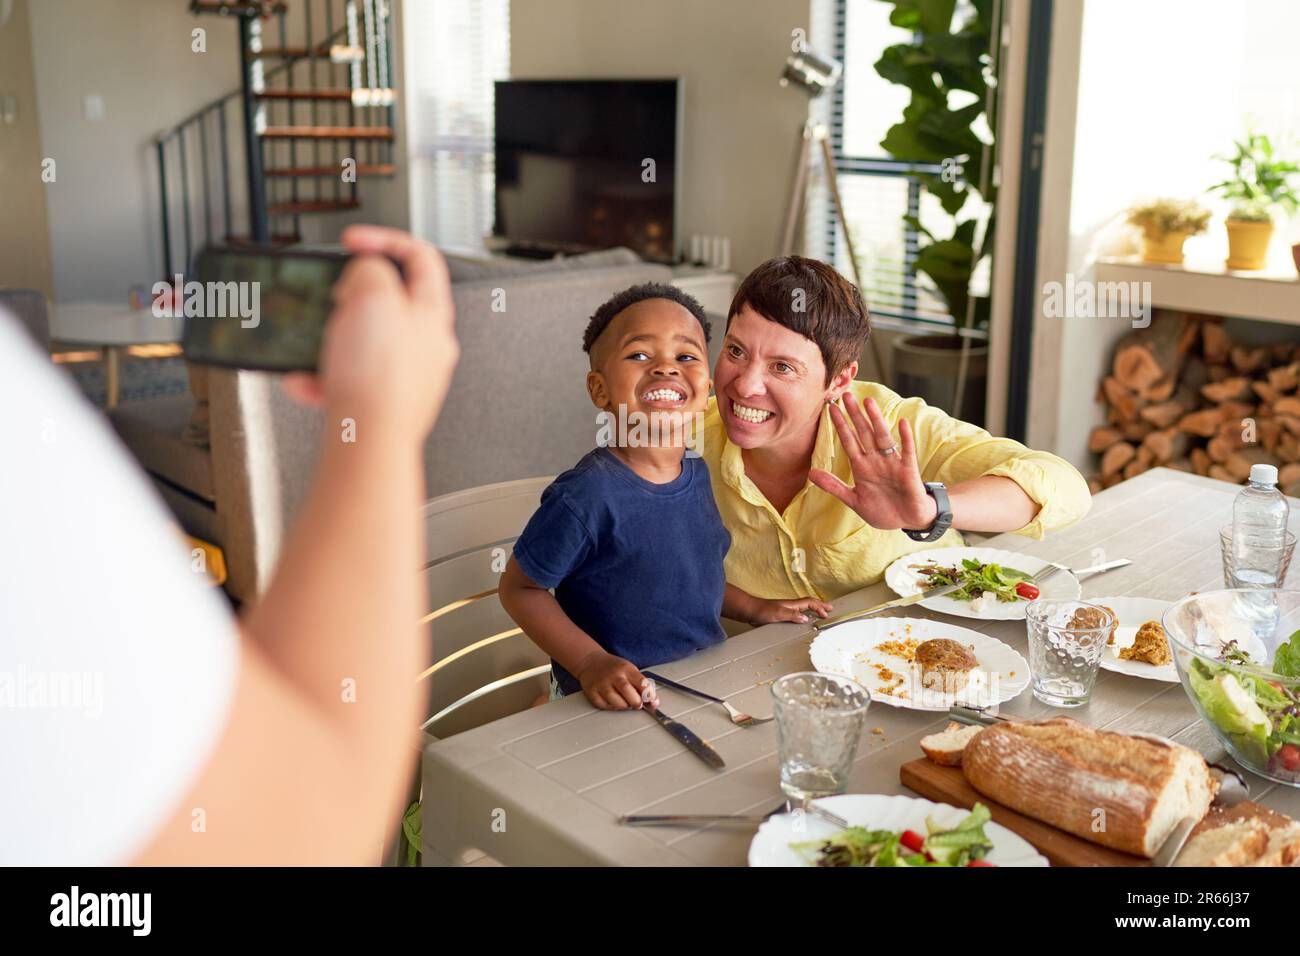 Happy mother and son posing for photo at dinner table Stock Photo